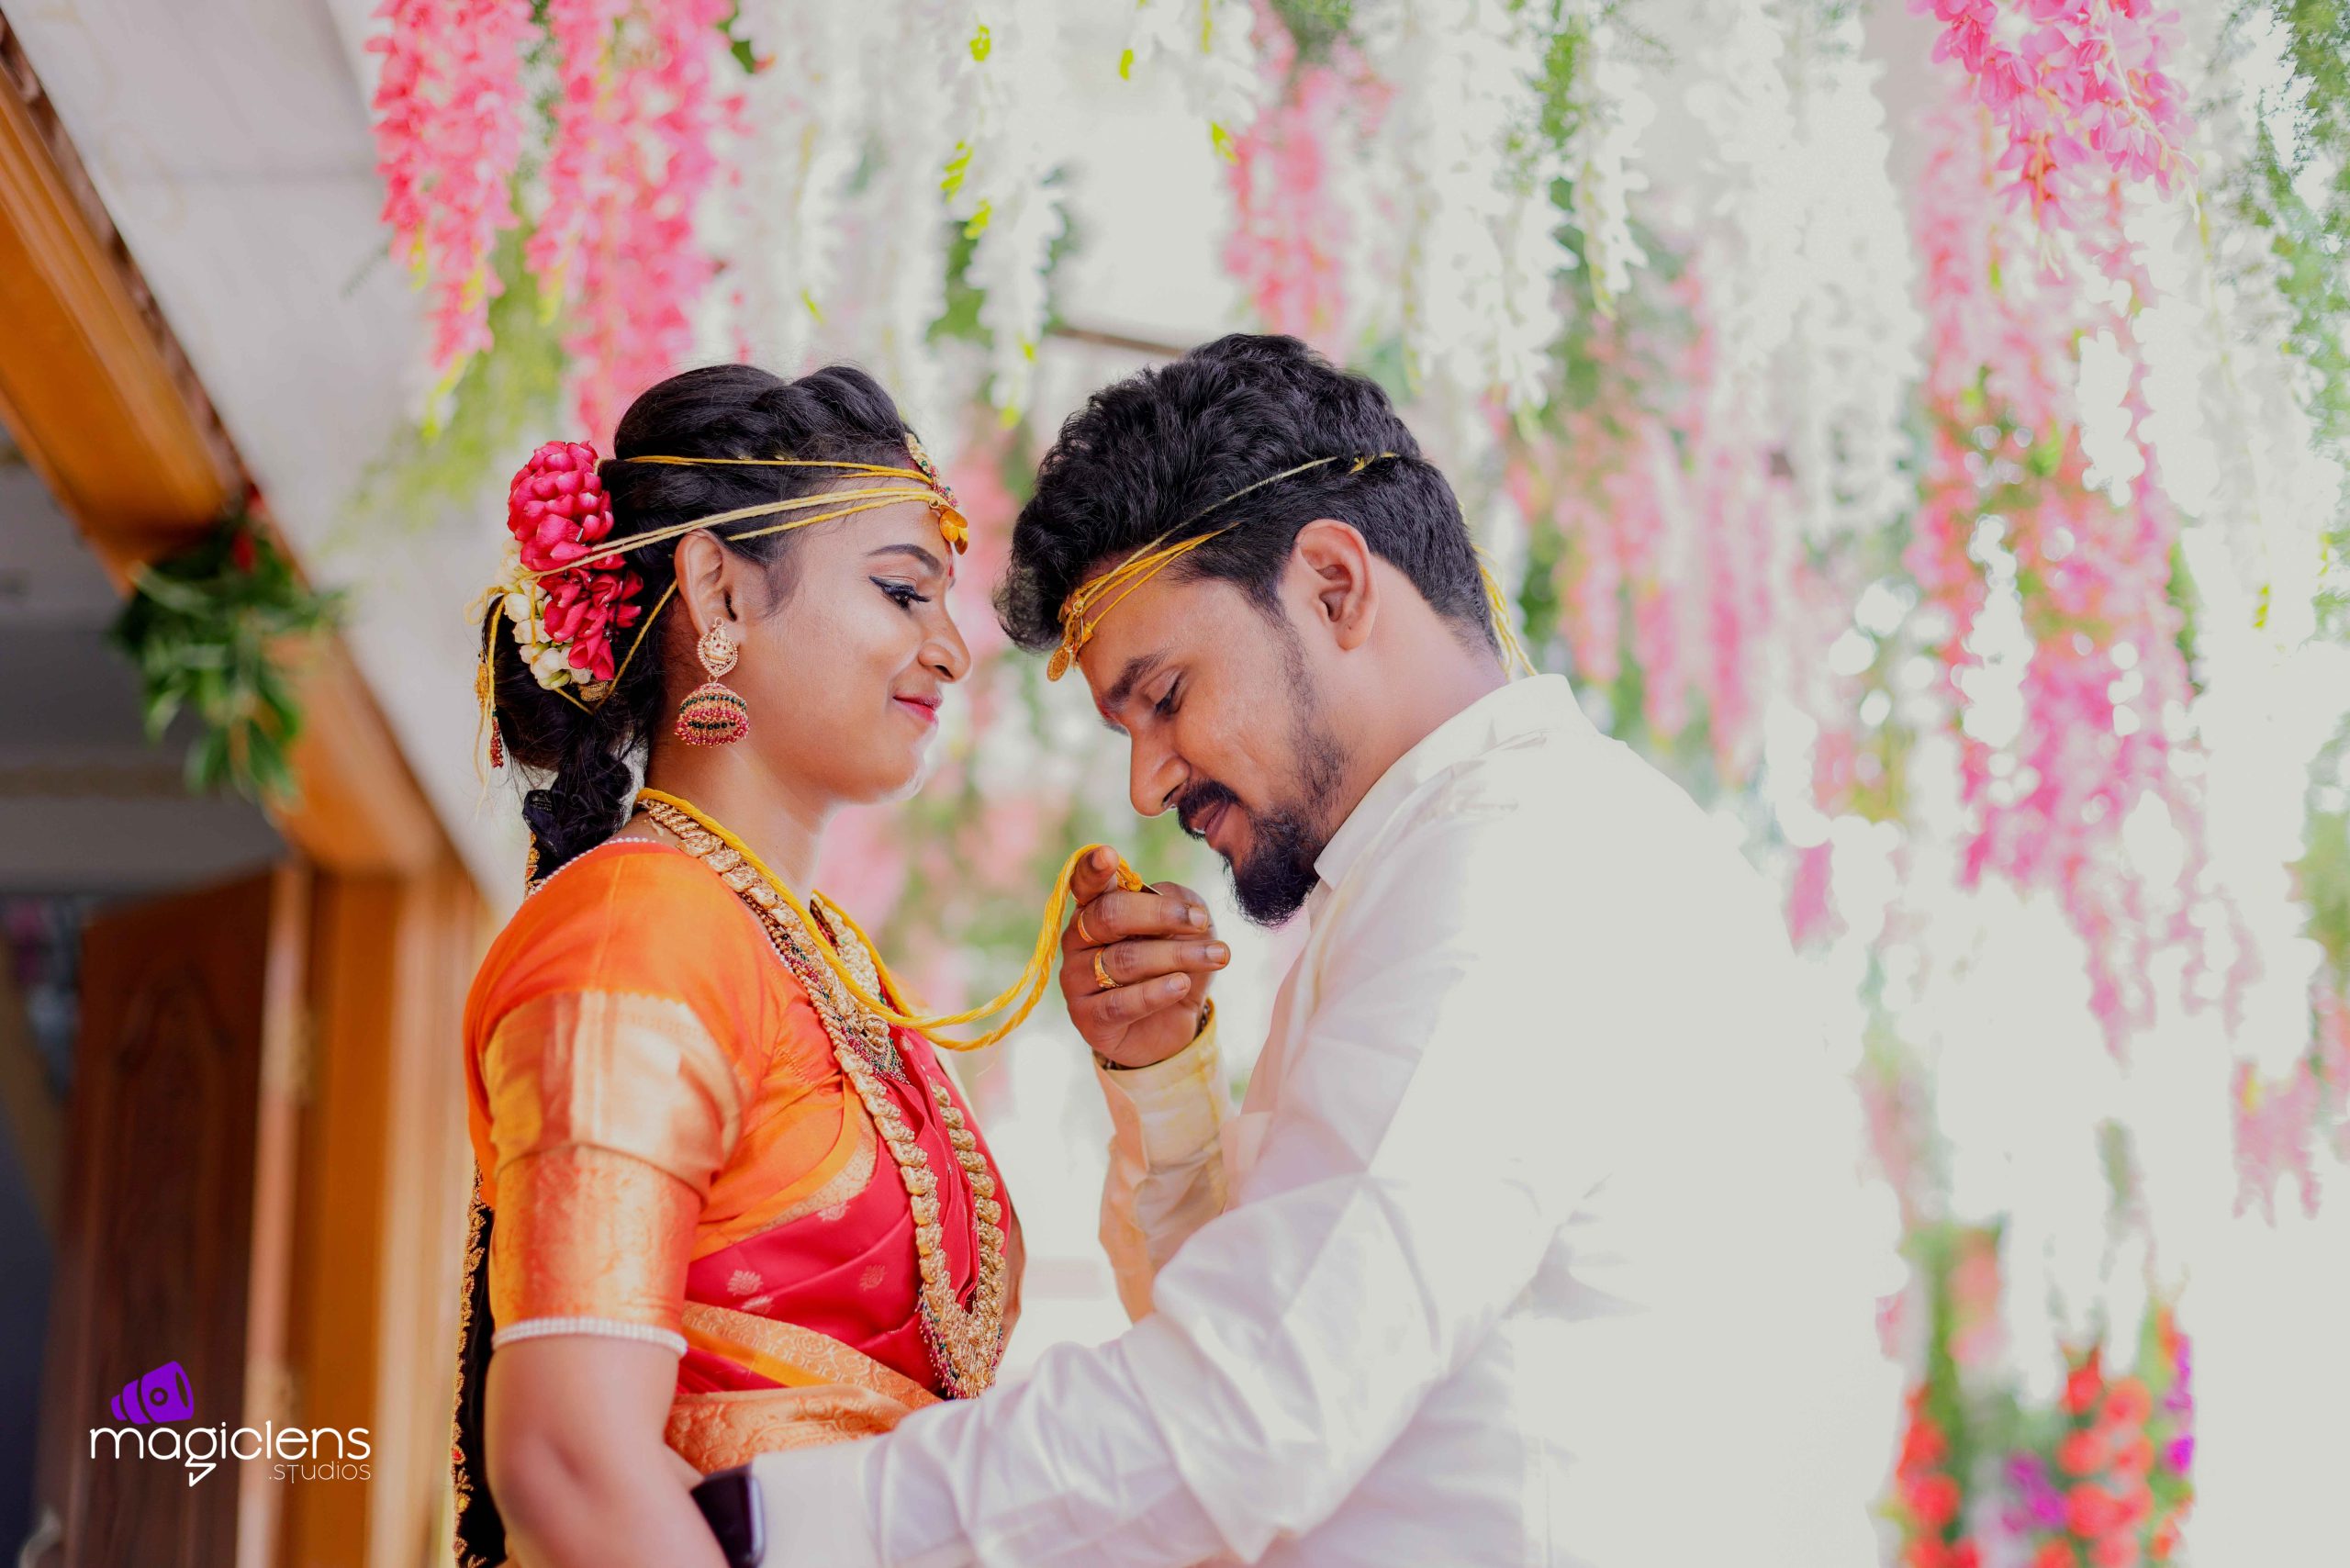 25 Most Beautiful Indian Wedding Photography examples - part 2